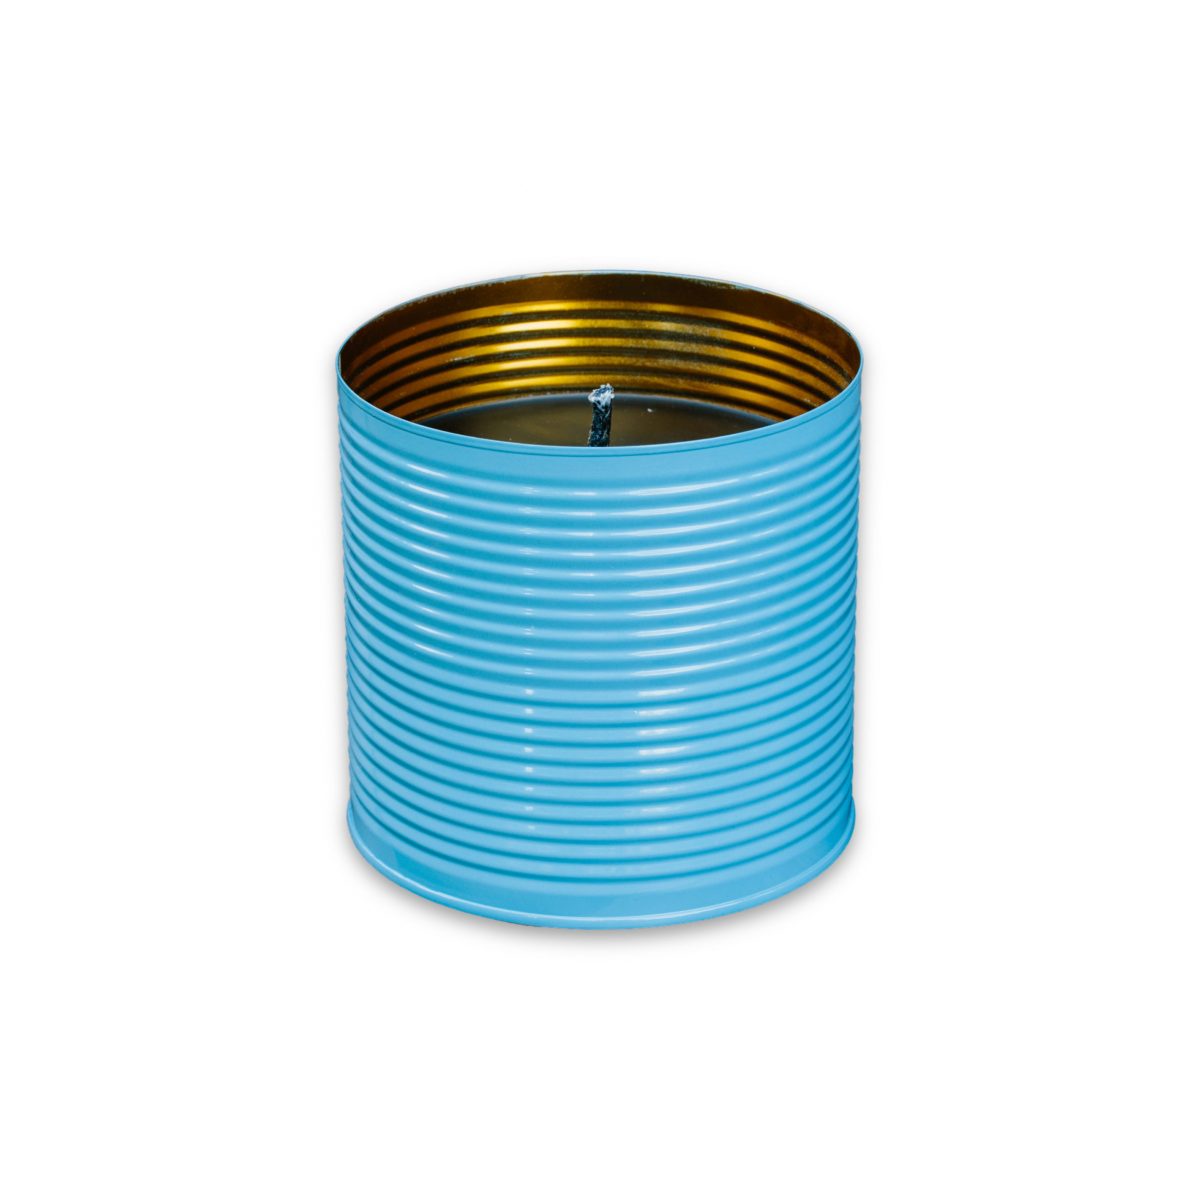 Outdoorcandle light blue Living by Heart www.myhomeandmore.de